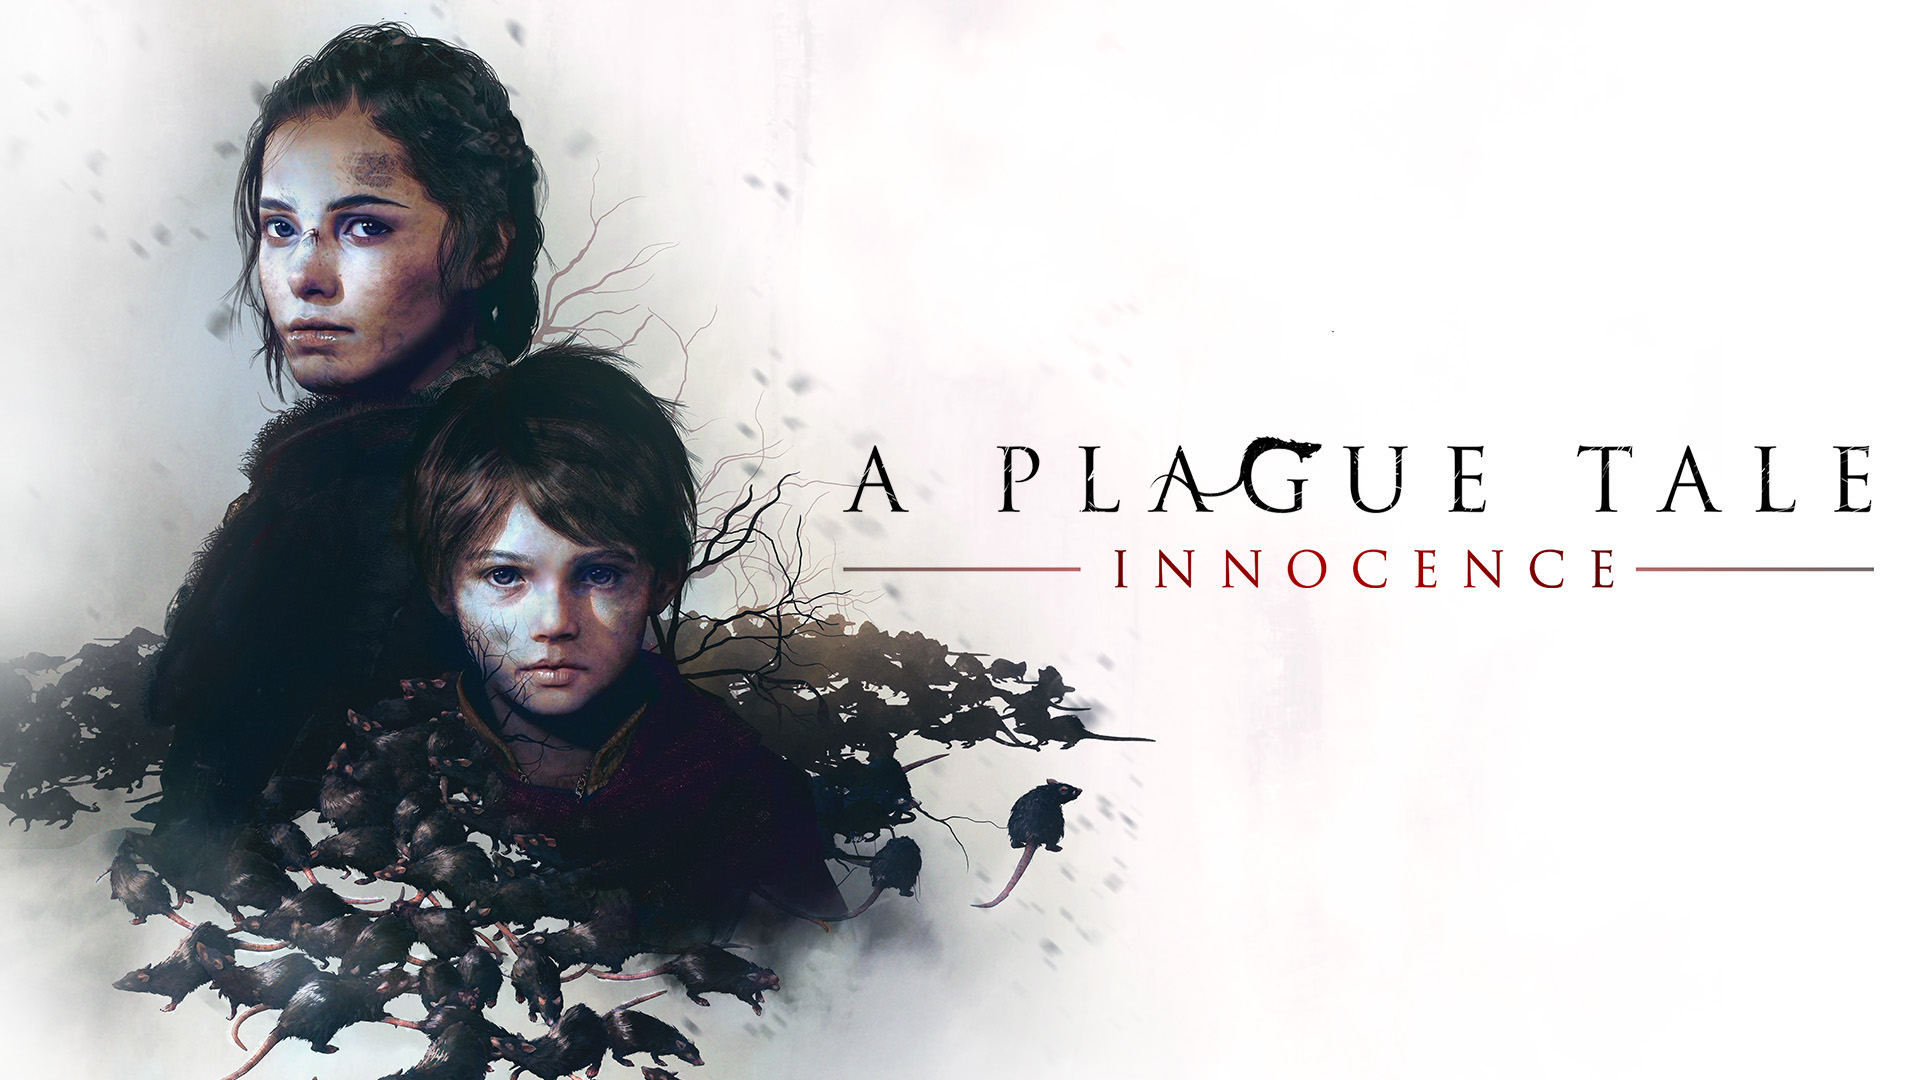 Try out A Plague Tale: Innocence for free on the Focus Entertainment Store